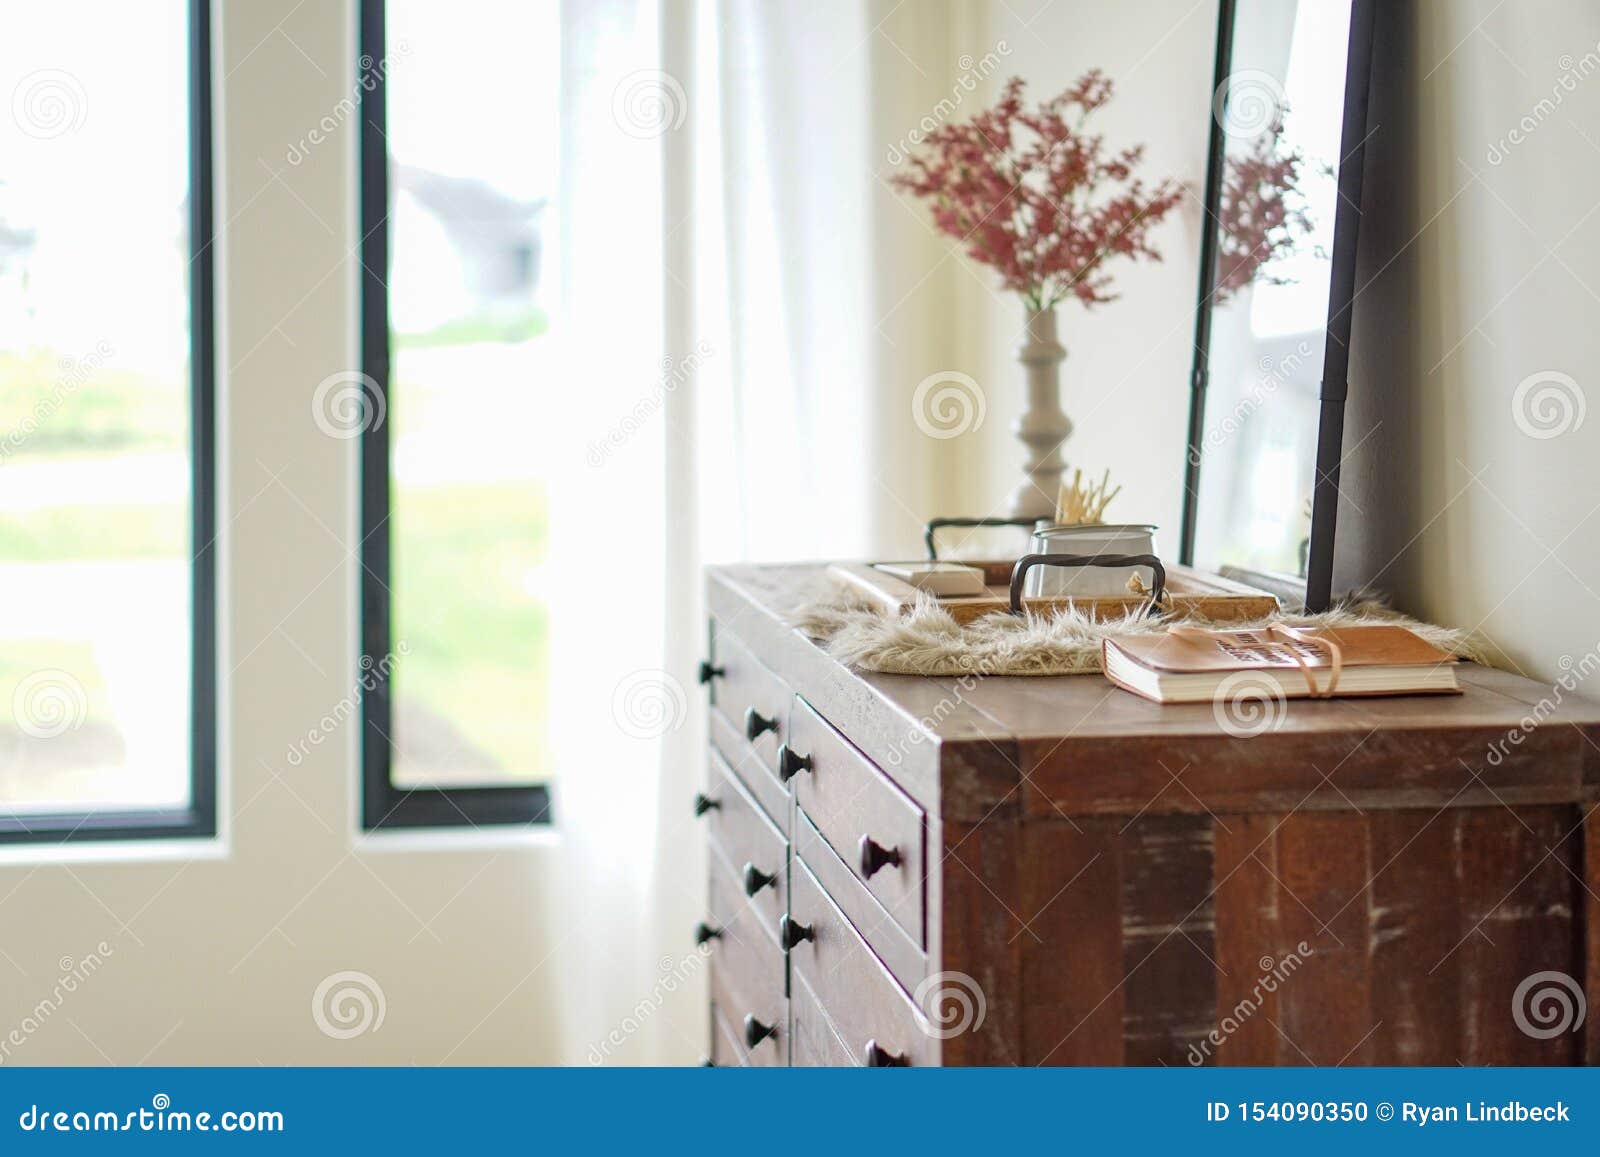 Peaceful Dresser By Open Window Stock Photo Image Of Lovely